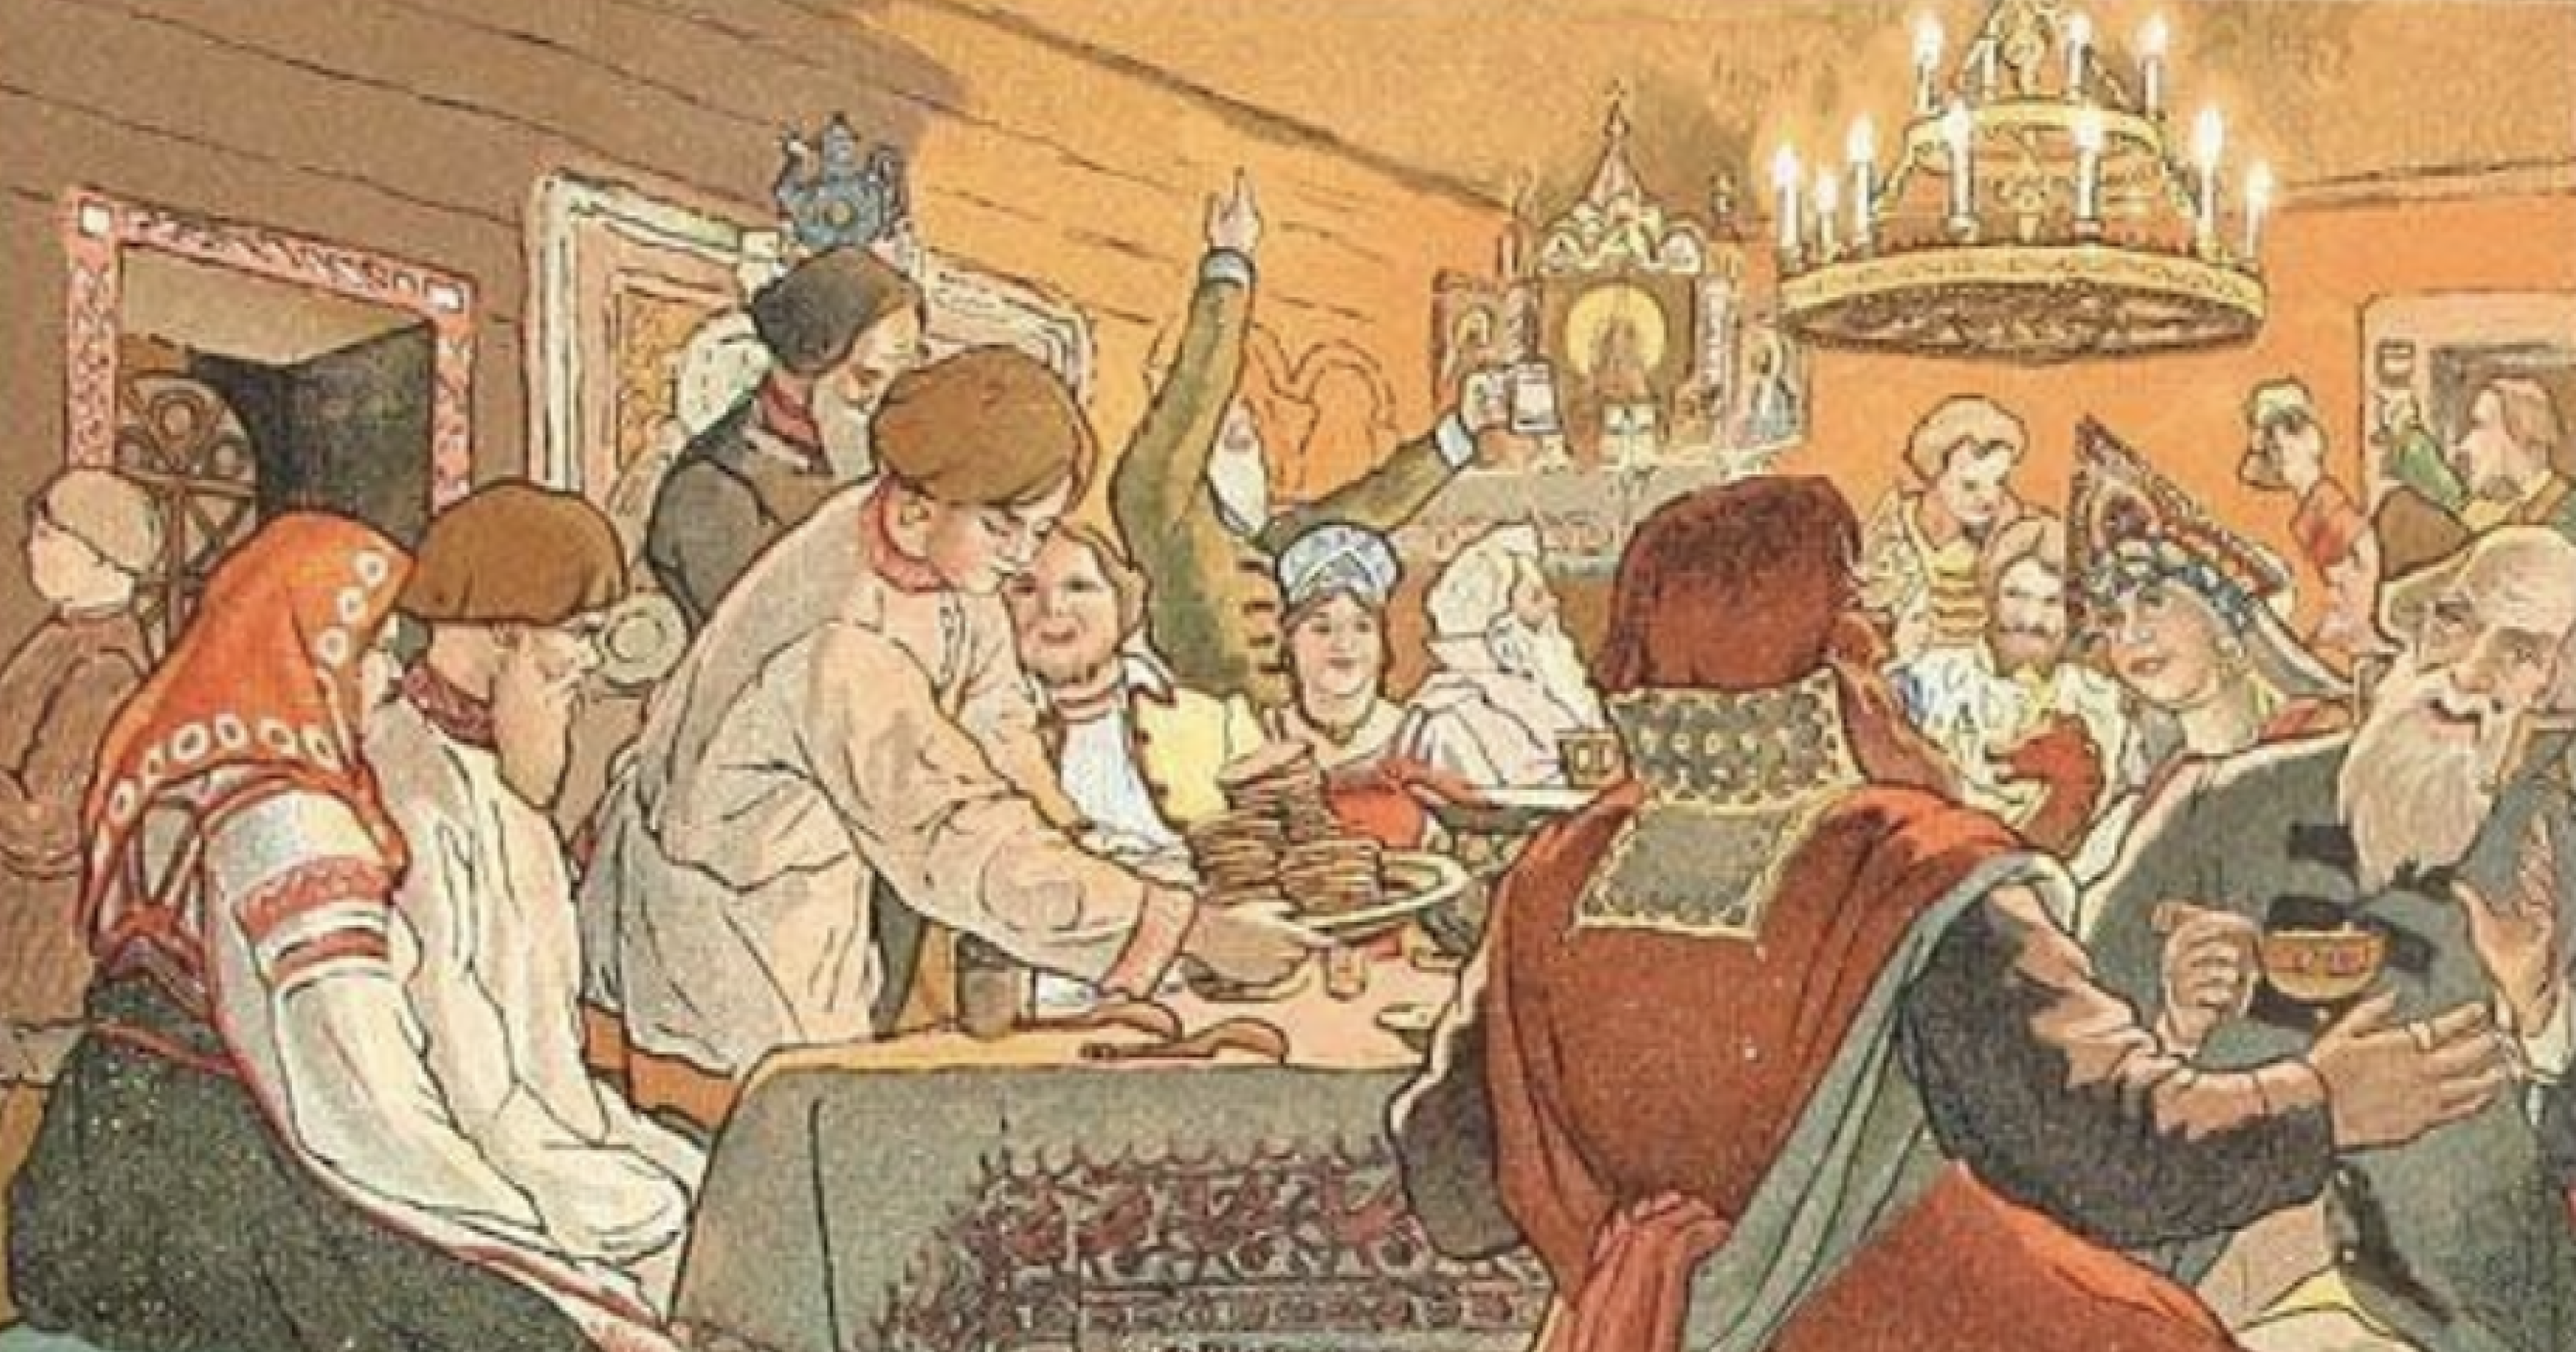 An old royal scene with people being festive with food and drinks